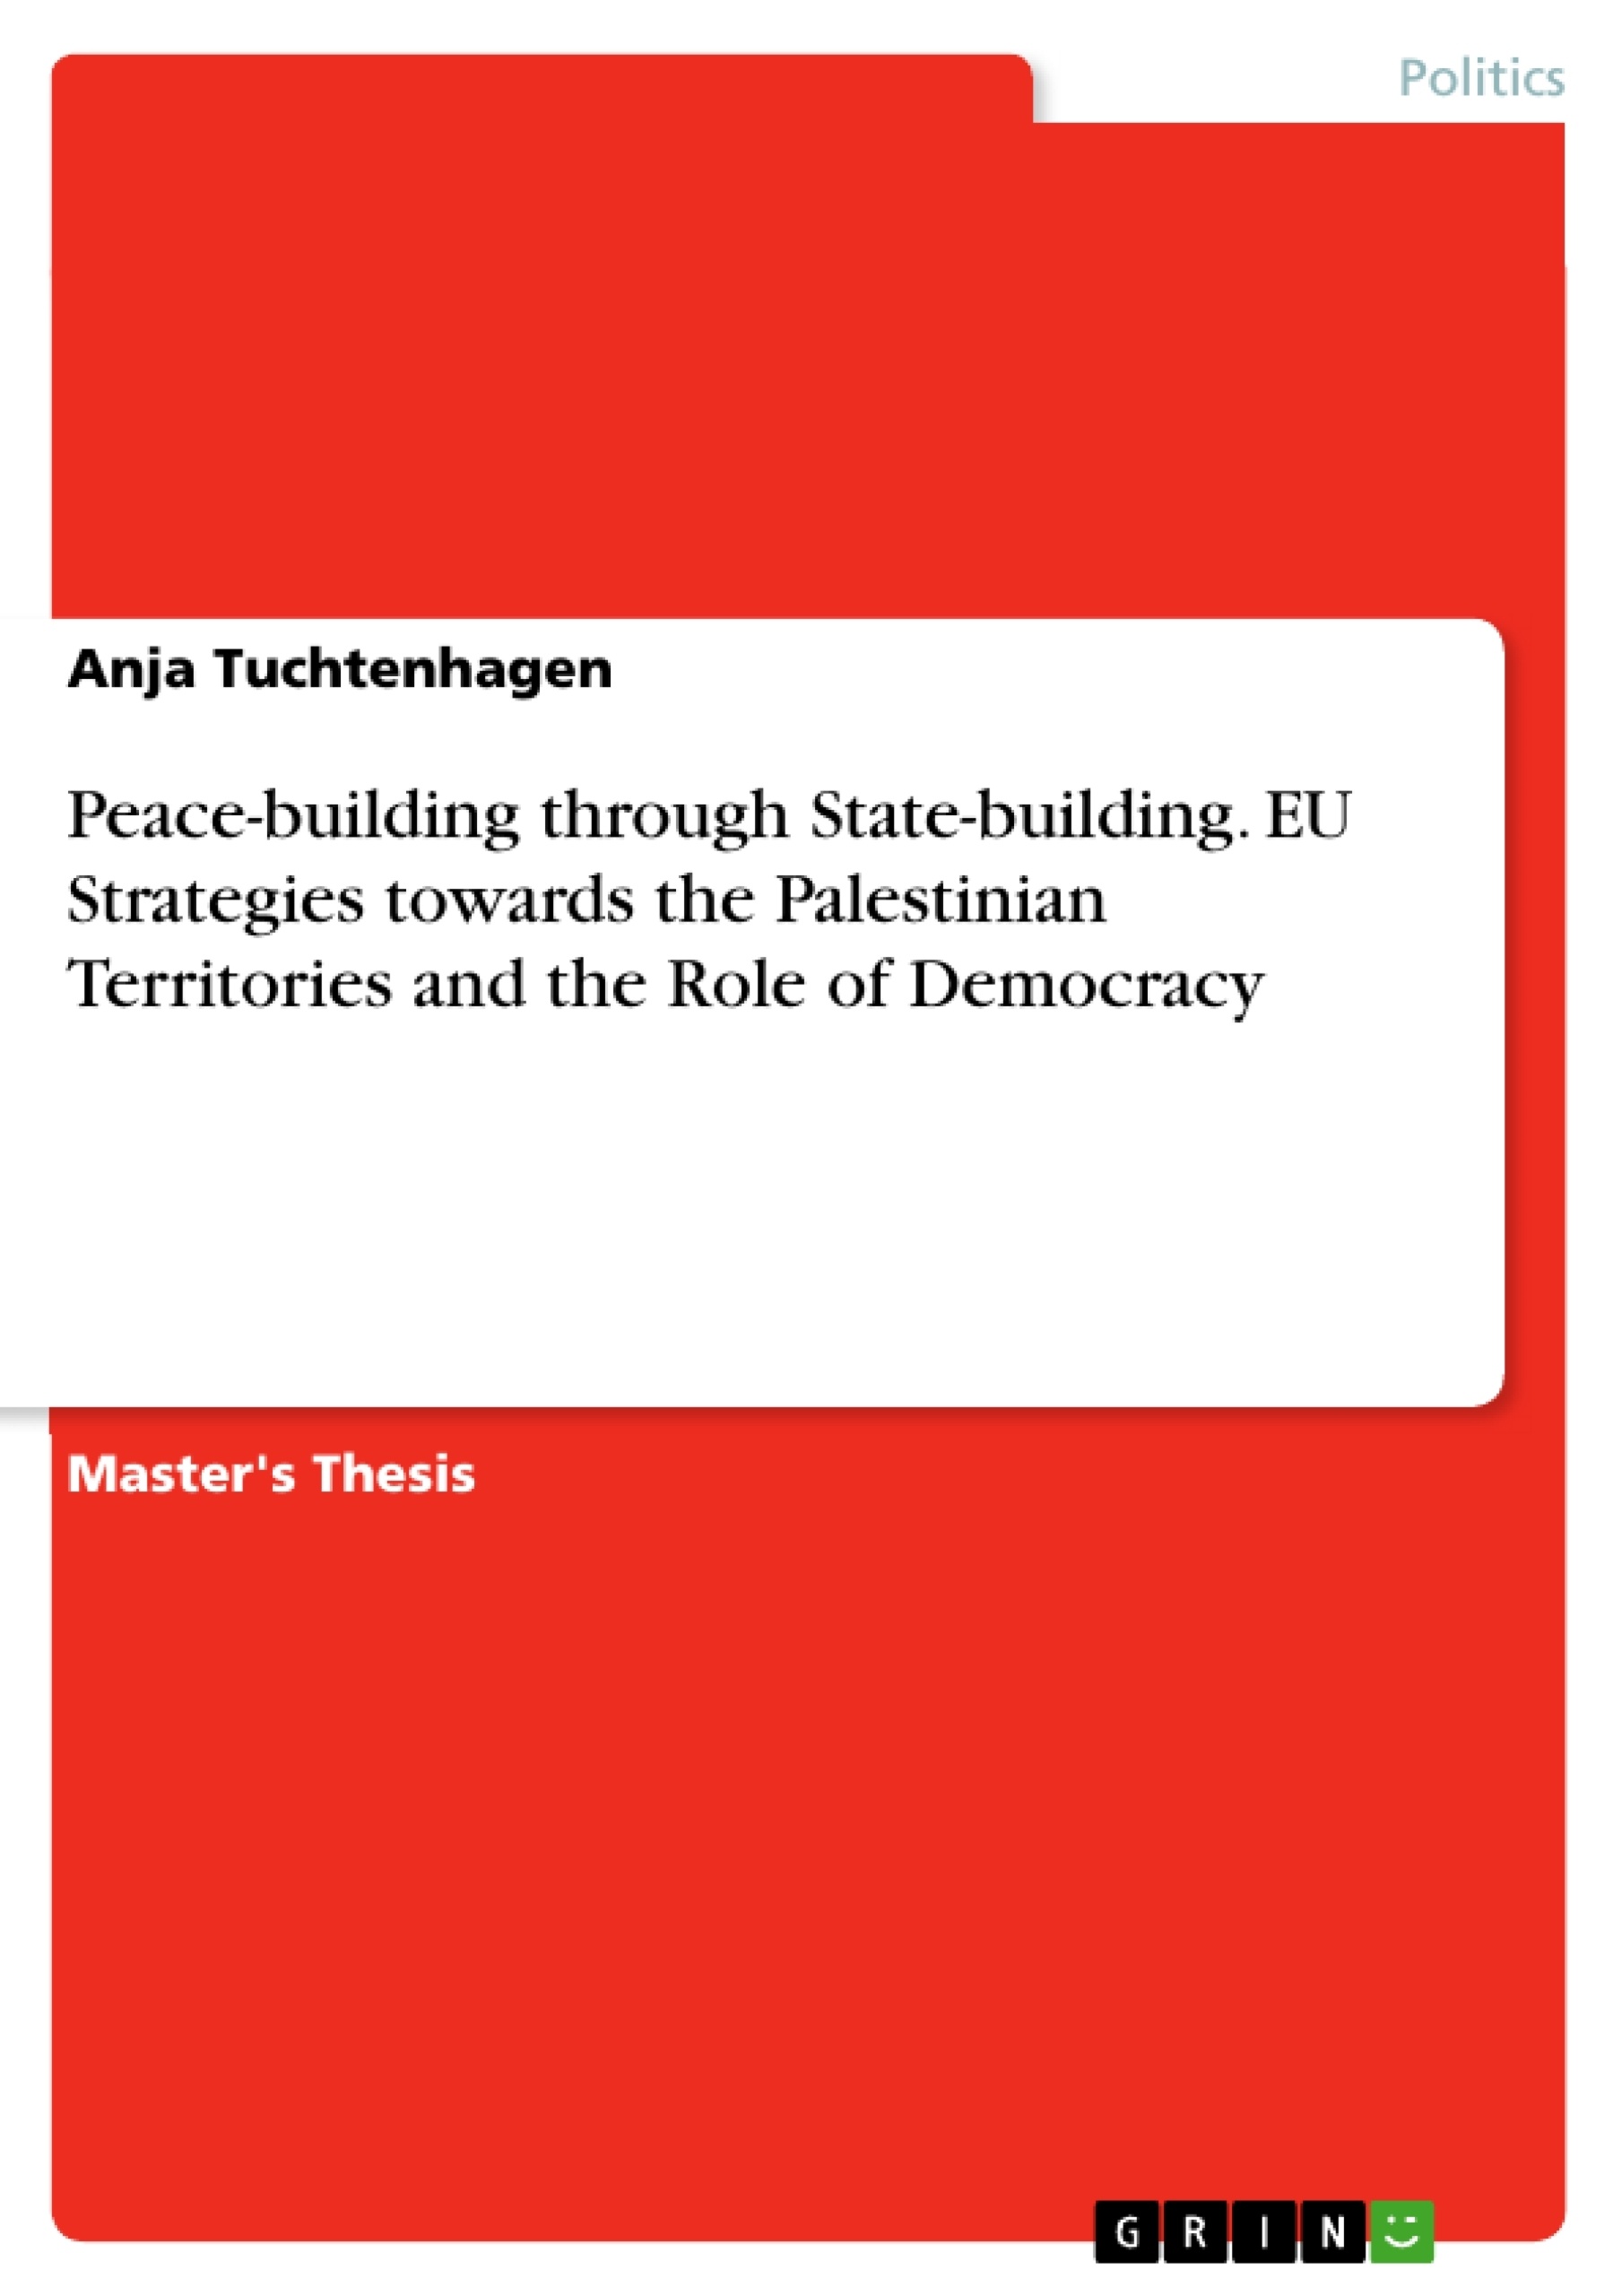 Título: Peace-building through State-building. EU Strategies towards the Palestinian Territories and the Role of Democracy